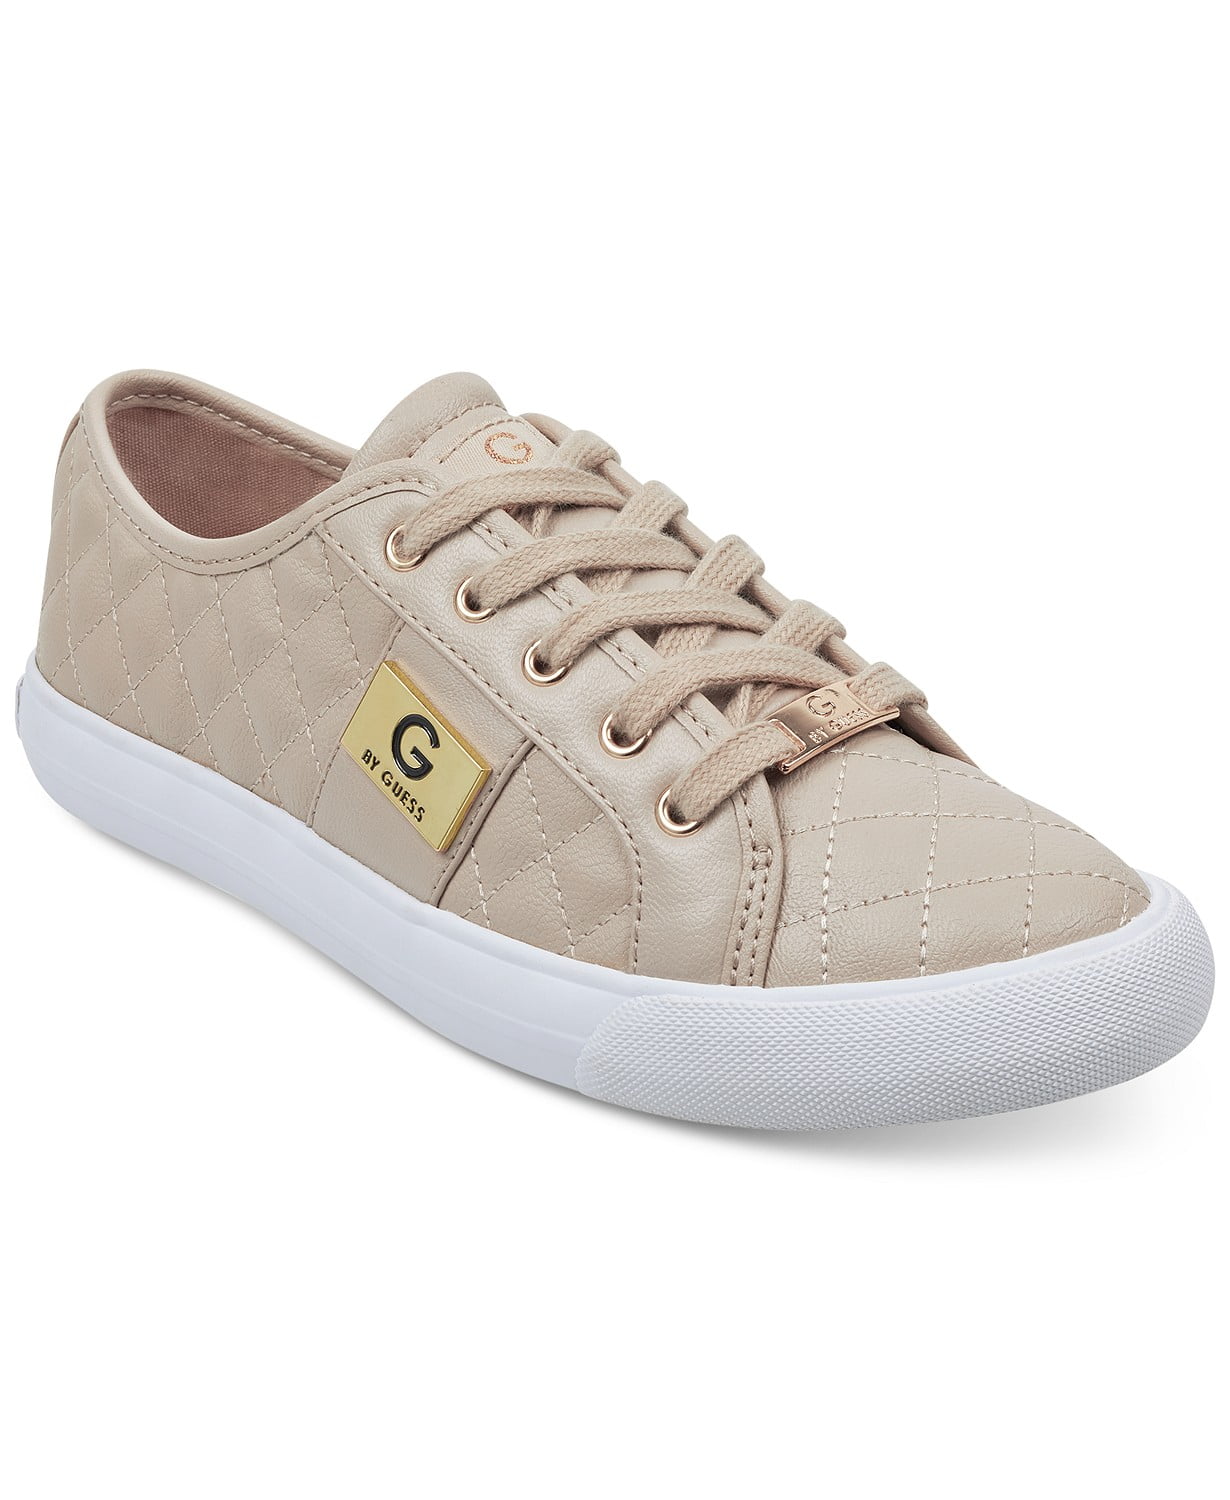 forælder Konfrontere Tolkning G by Guess Women's Lace Up Leather Quilted Pattern Sneakers Shoes Natural  (8) - Walmart.com